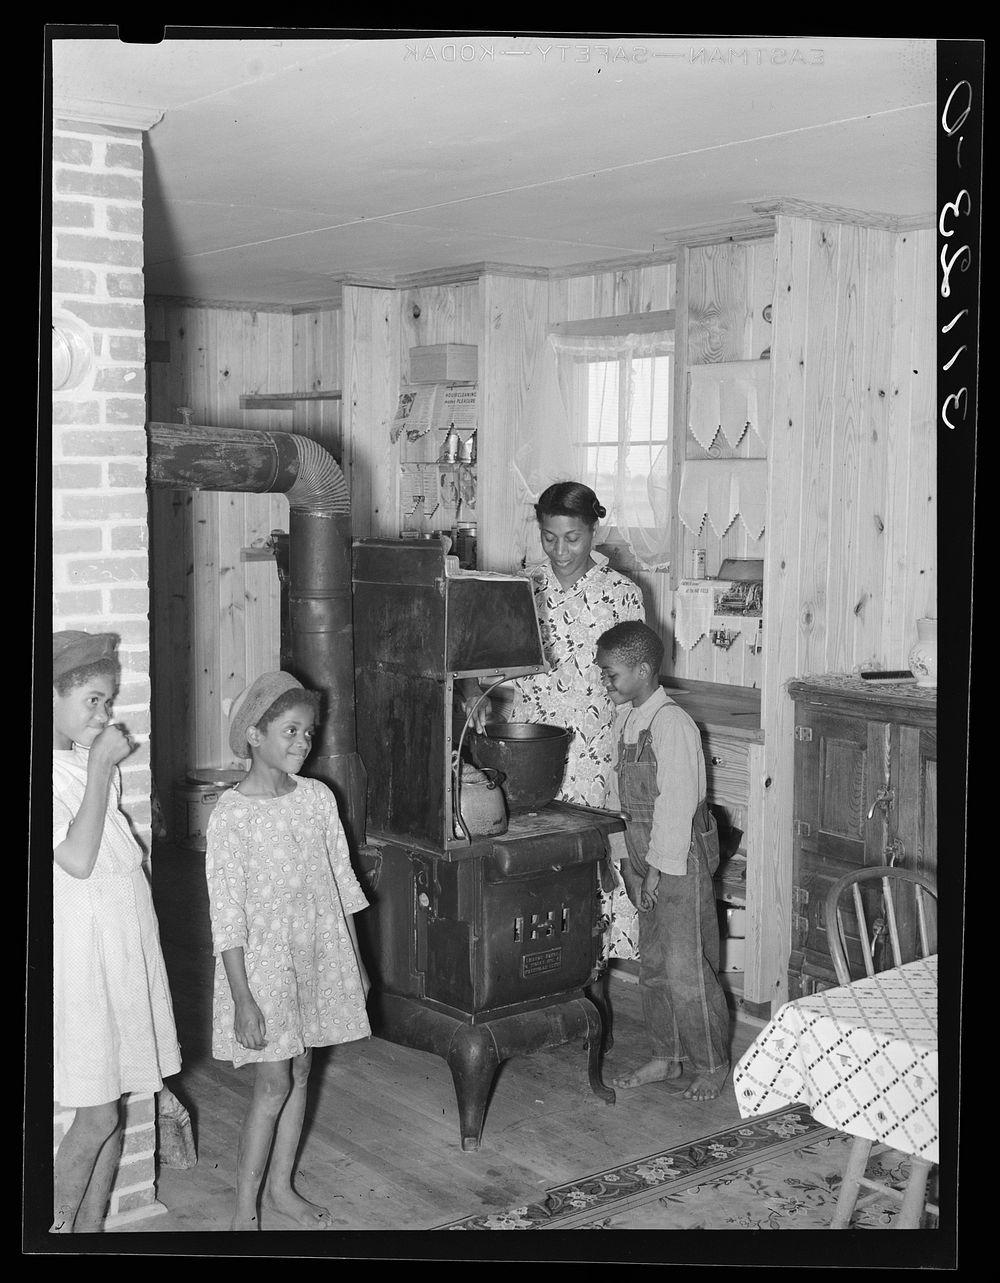 Southeast Missouri Farms. Sharecropper family in new home. La Forge project, Missouri by Russell Lee